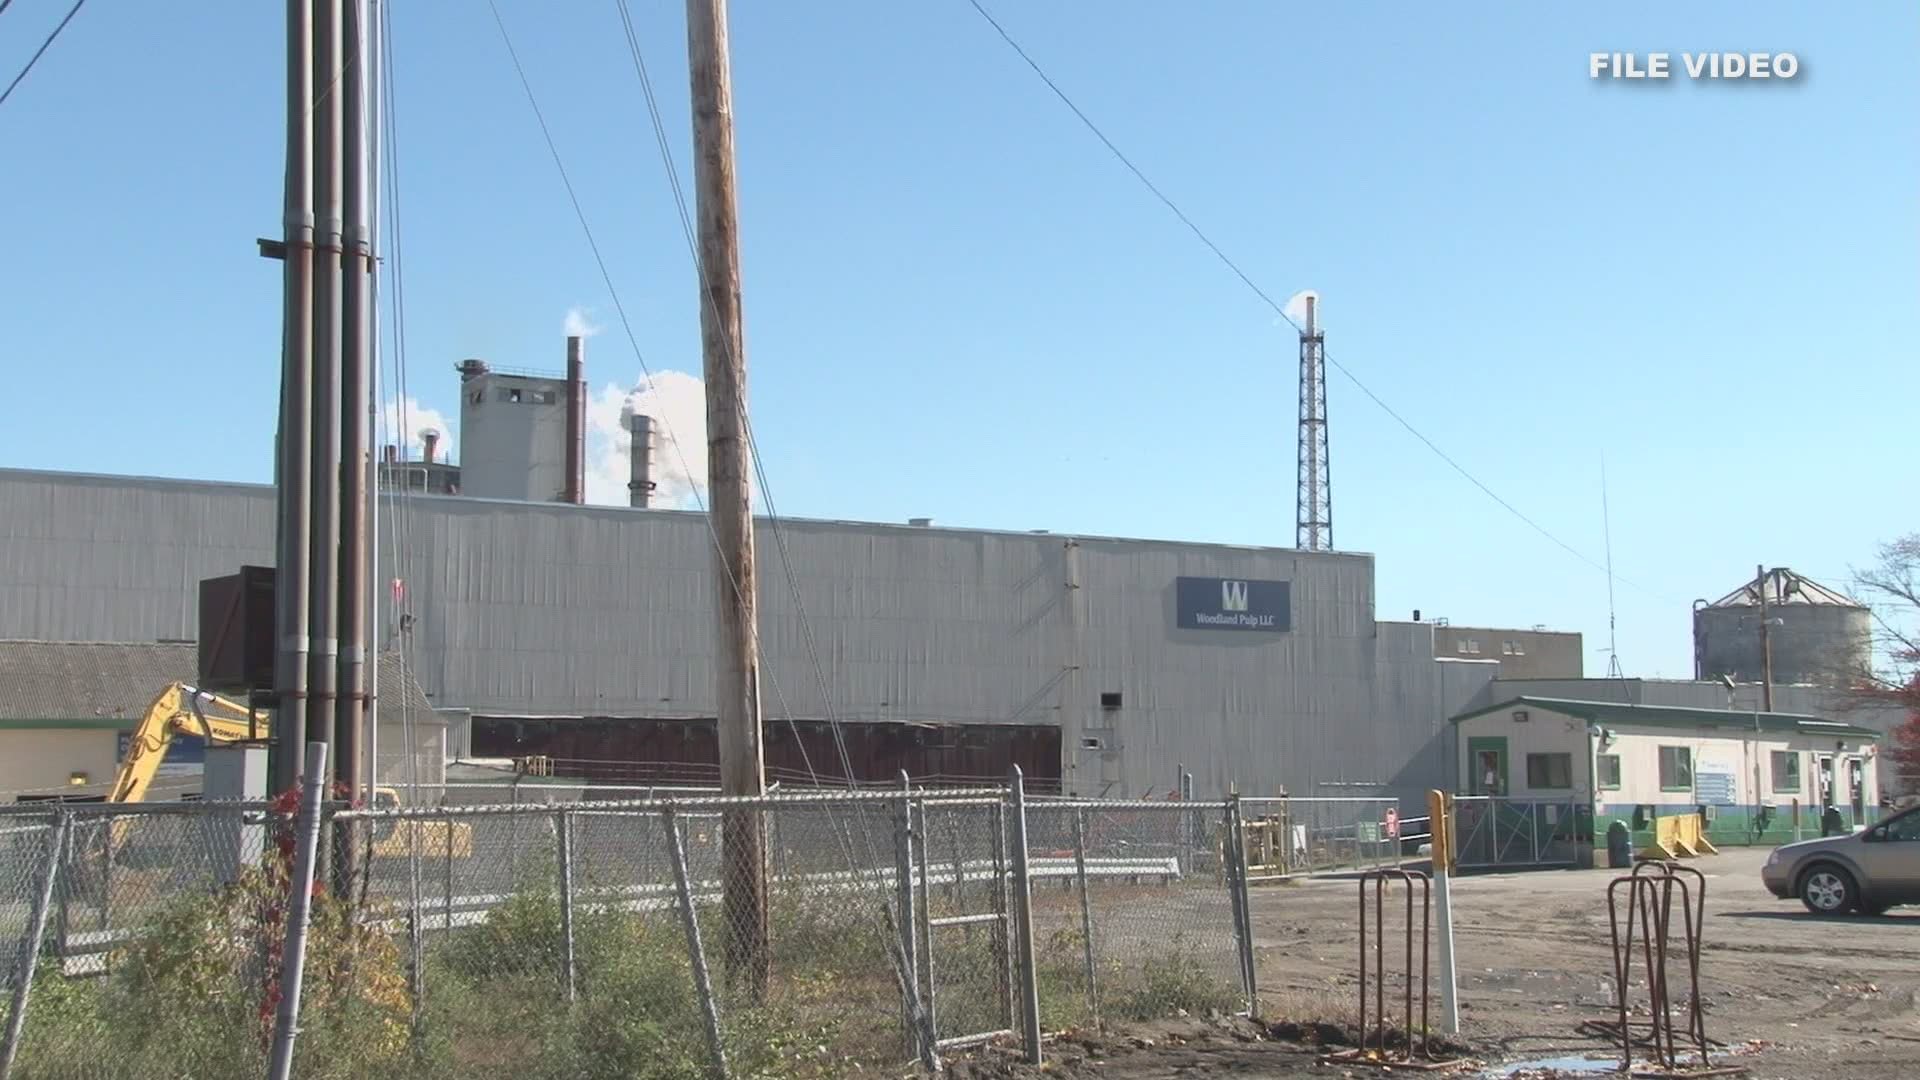 400+ Baileyville mill workers tested for COVID-19 after cases found among out-of-state contractors